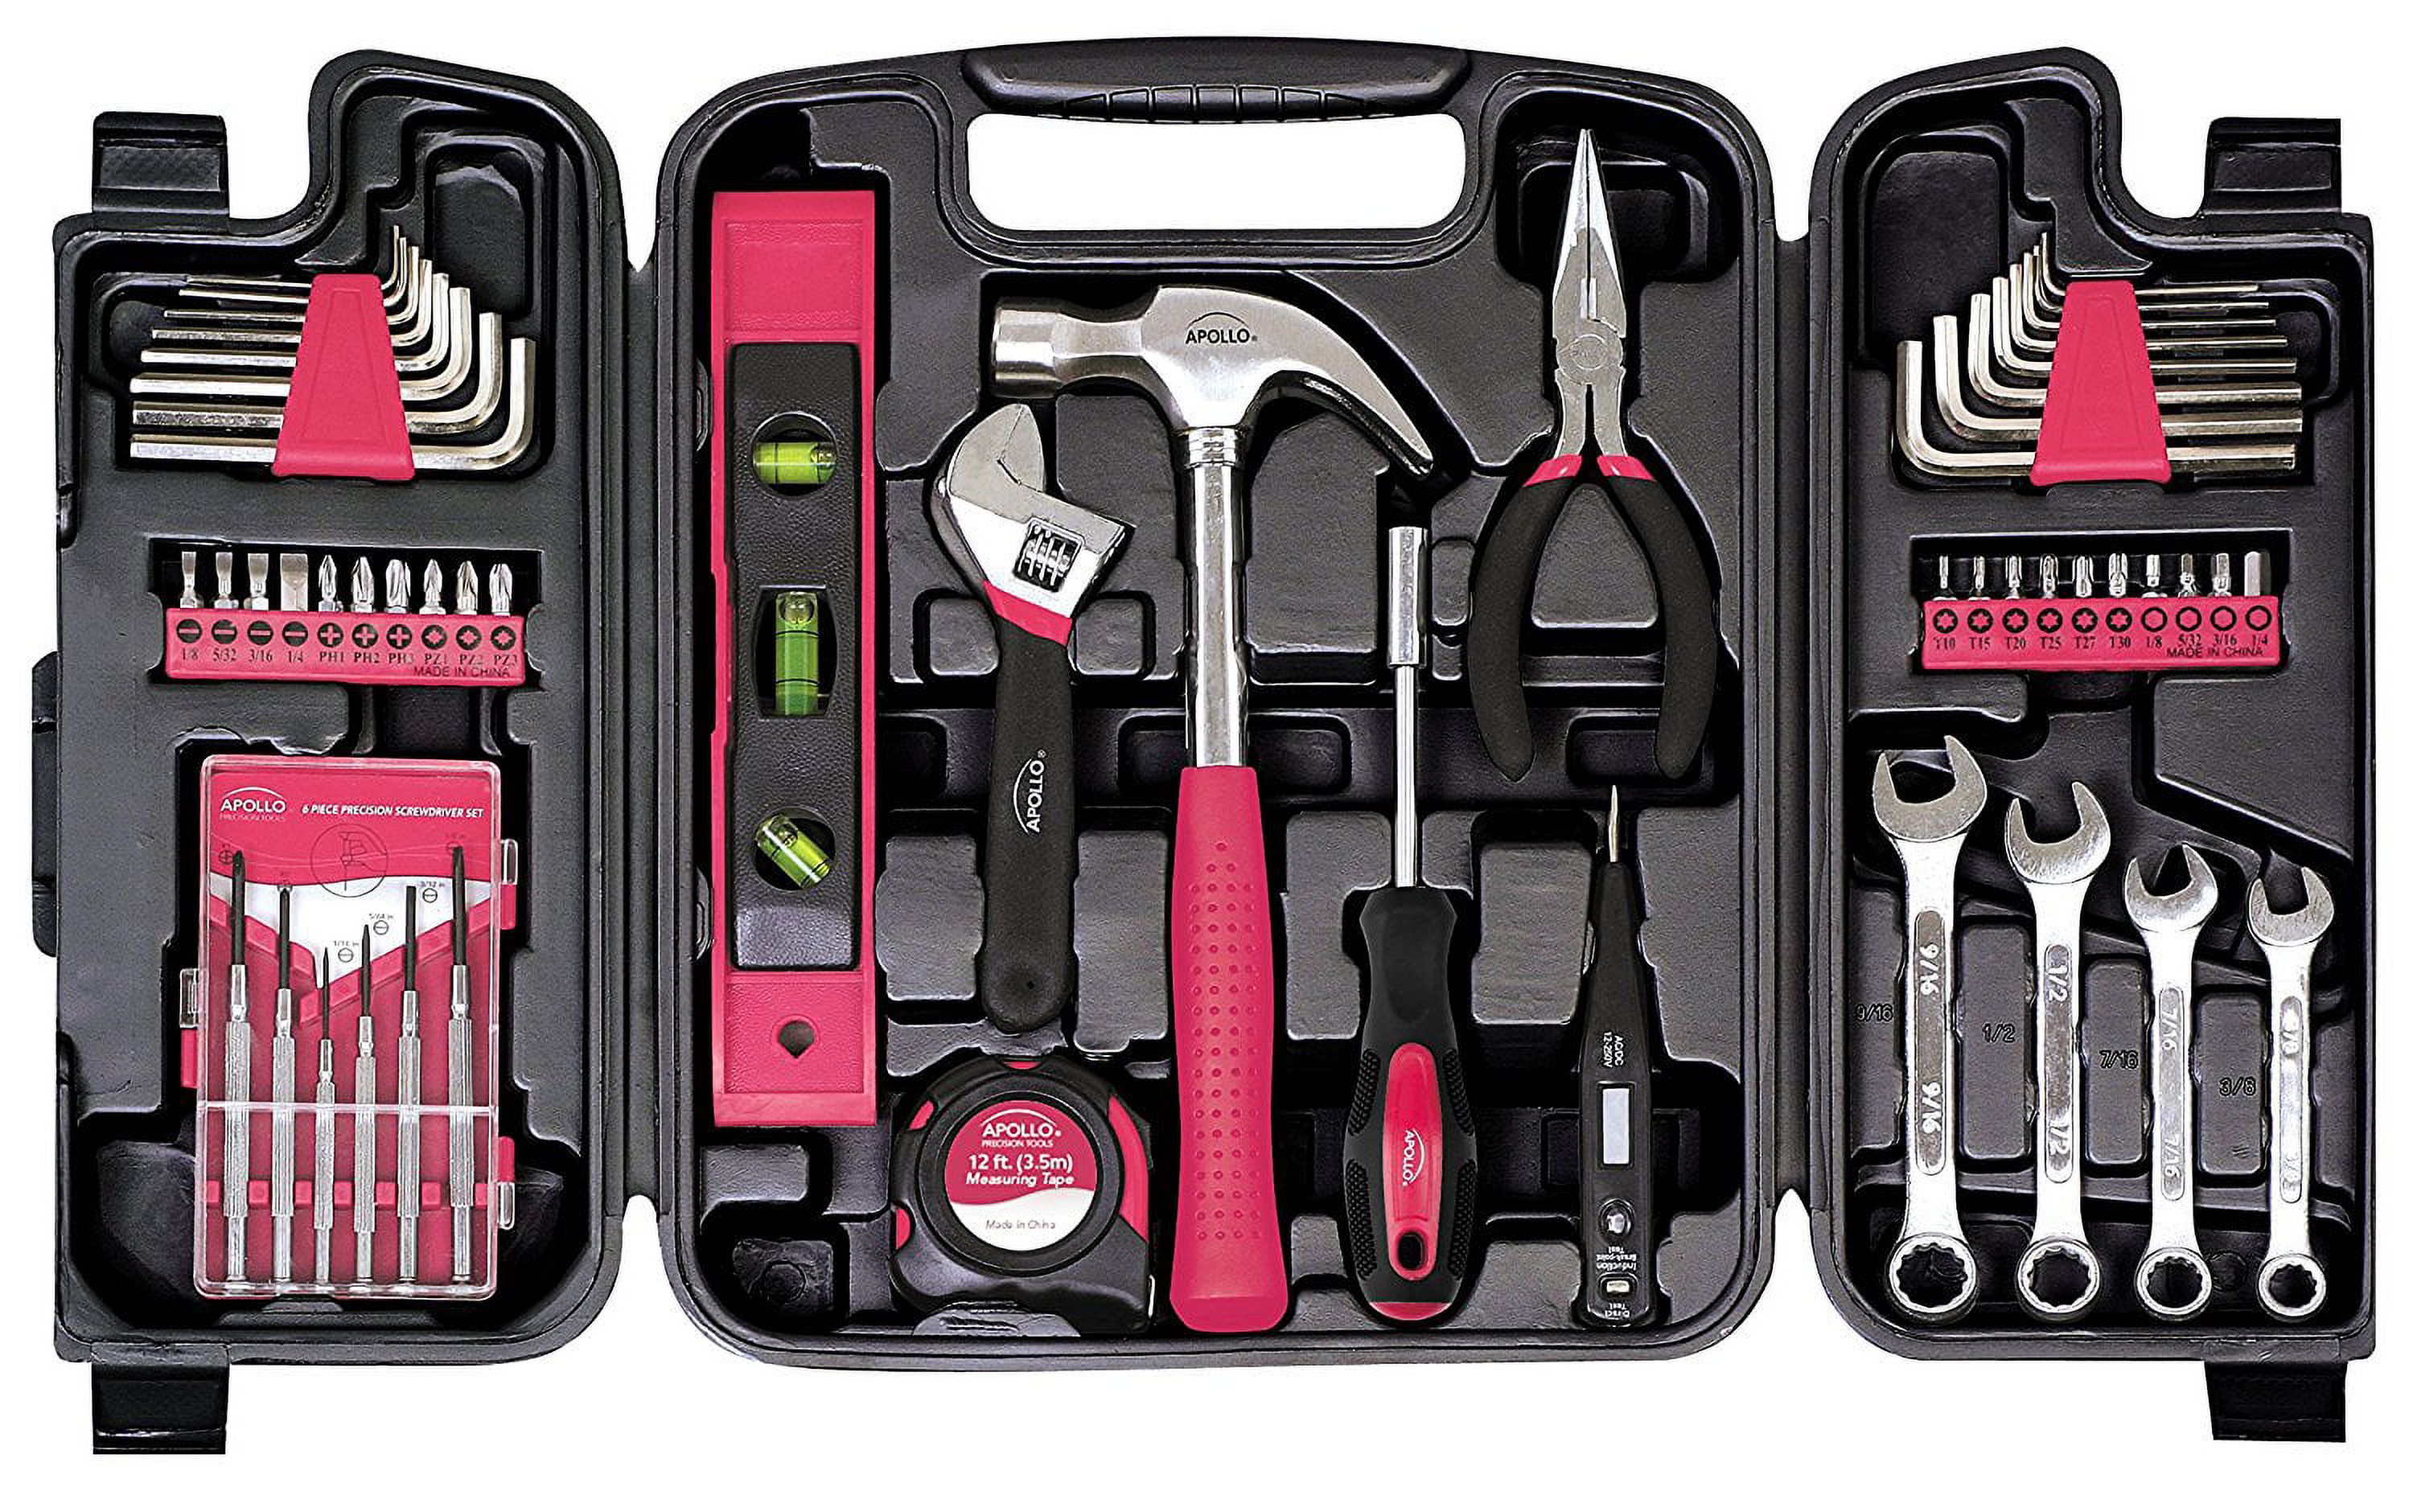 Apollo Tools Dt9408 53 Piece Household Tool Set With Wrenches, Precision Screwdriver Set And Most Reached For Hand Tools In Storage Case - image 5 of 5